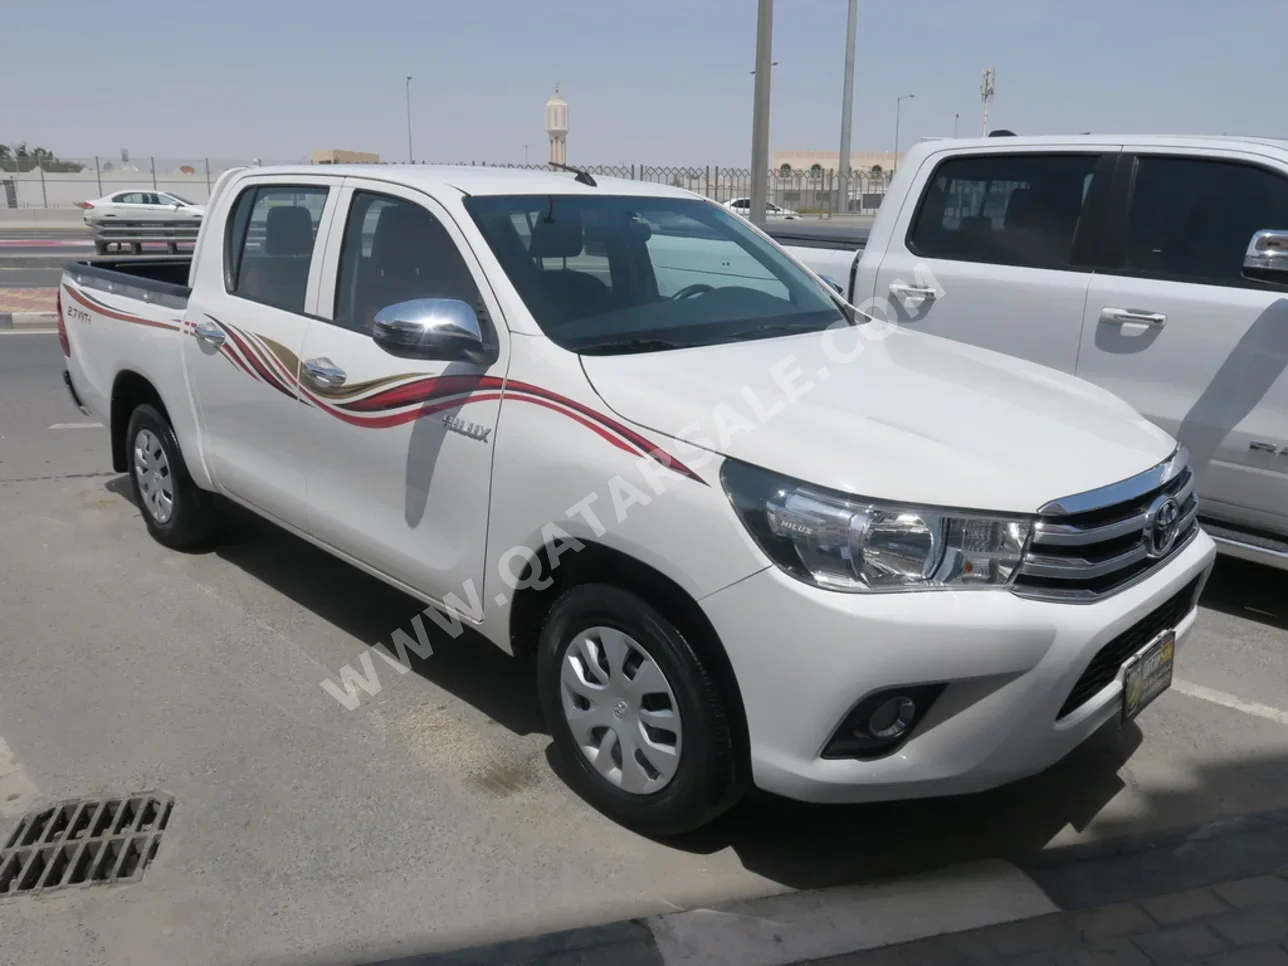 Toyota  Hilux  2021  Automatic  57,000 Km  4 Cylinder  Rear Wheel Drive (RWD)  Pick Up  White